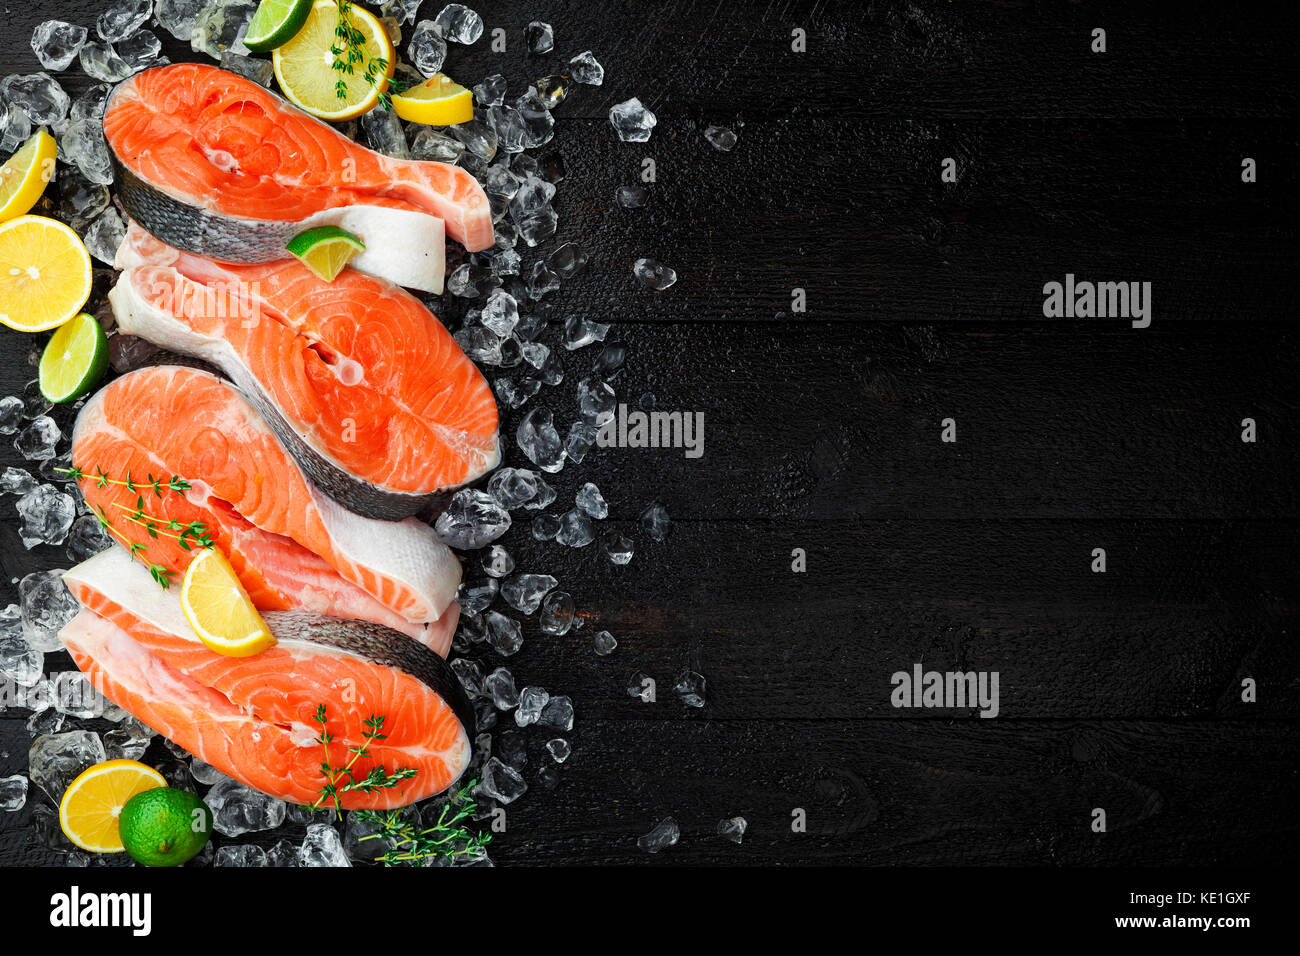 Salmon steaks on ice on black wooden table top view. Fish food concept. Copy space Stock Photo